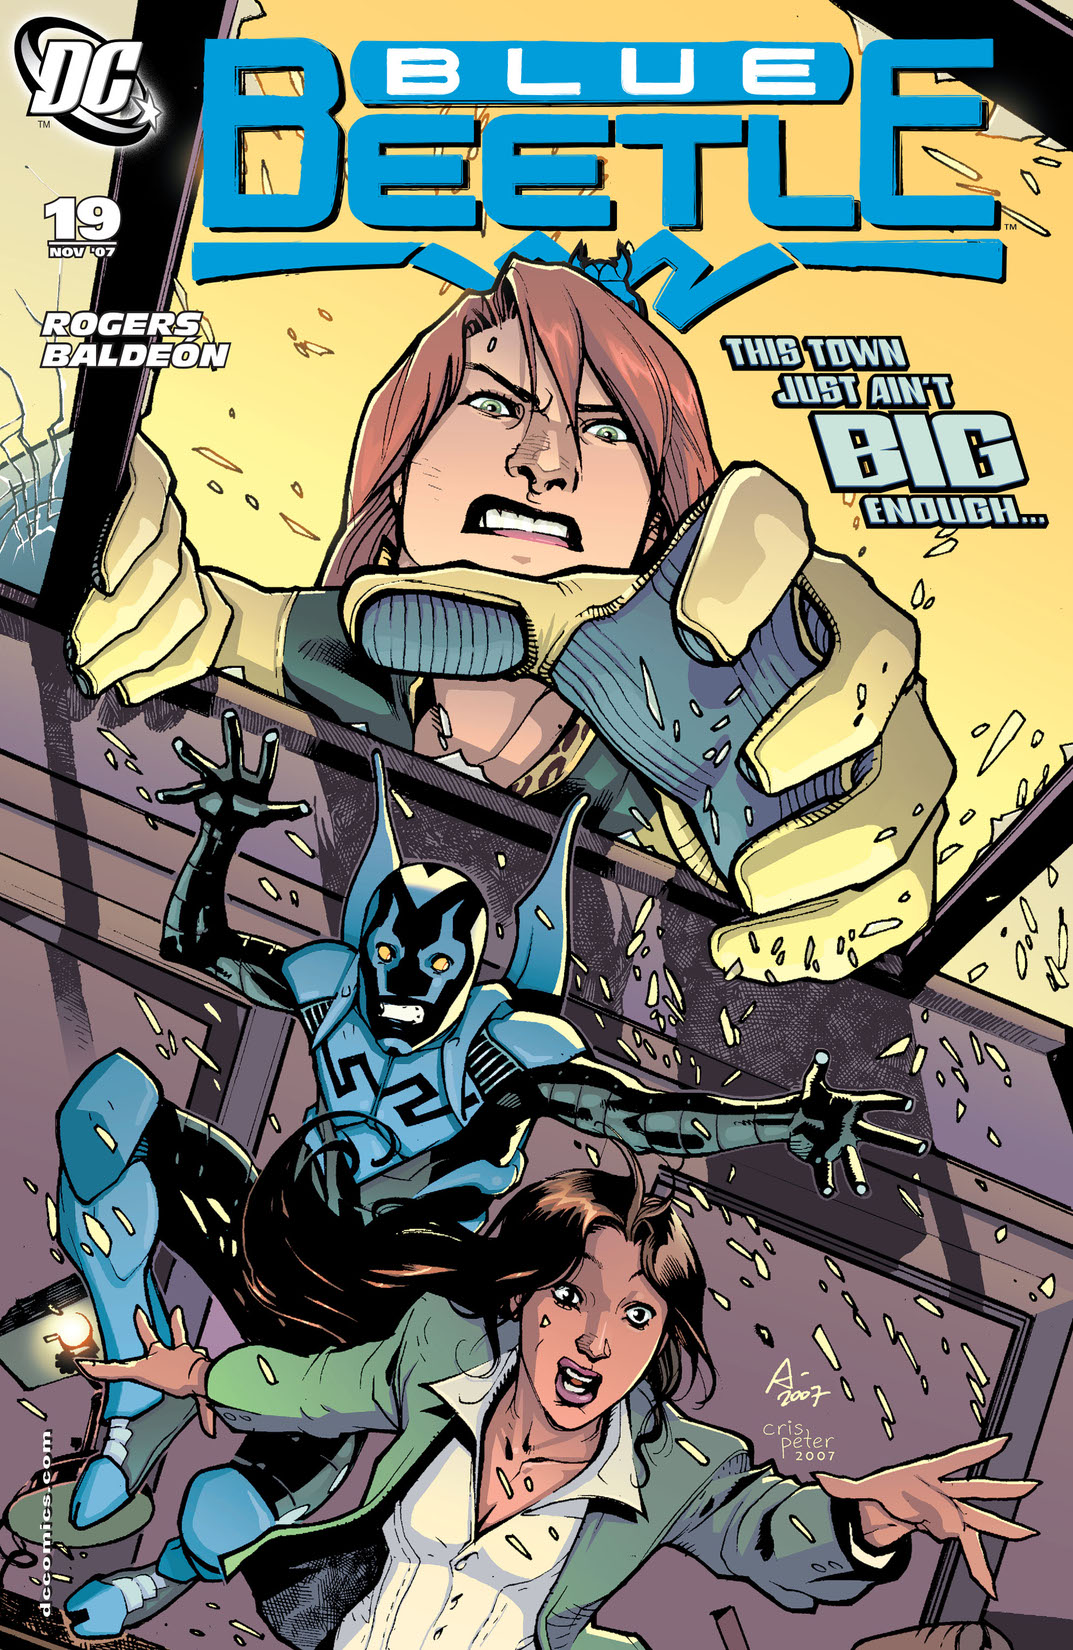 Blue Beetle (2006-) #19 preview images